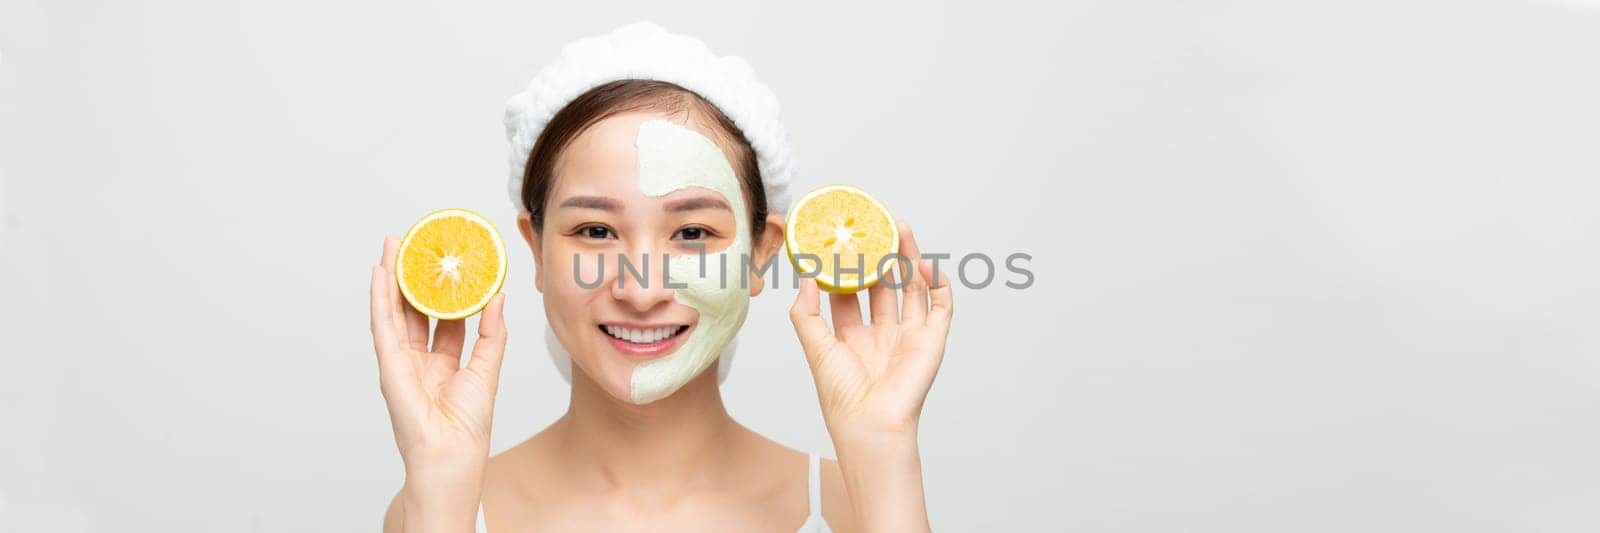 Emotional young woman with facial mask and halves of ripe orange on white background. Web banner.